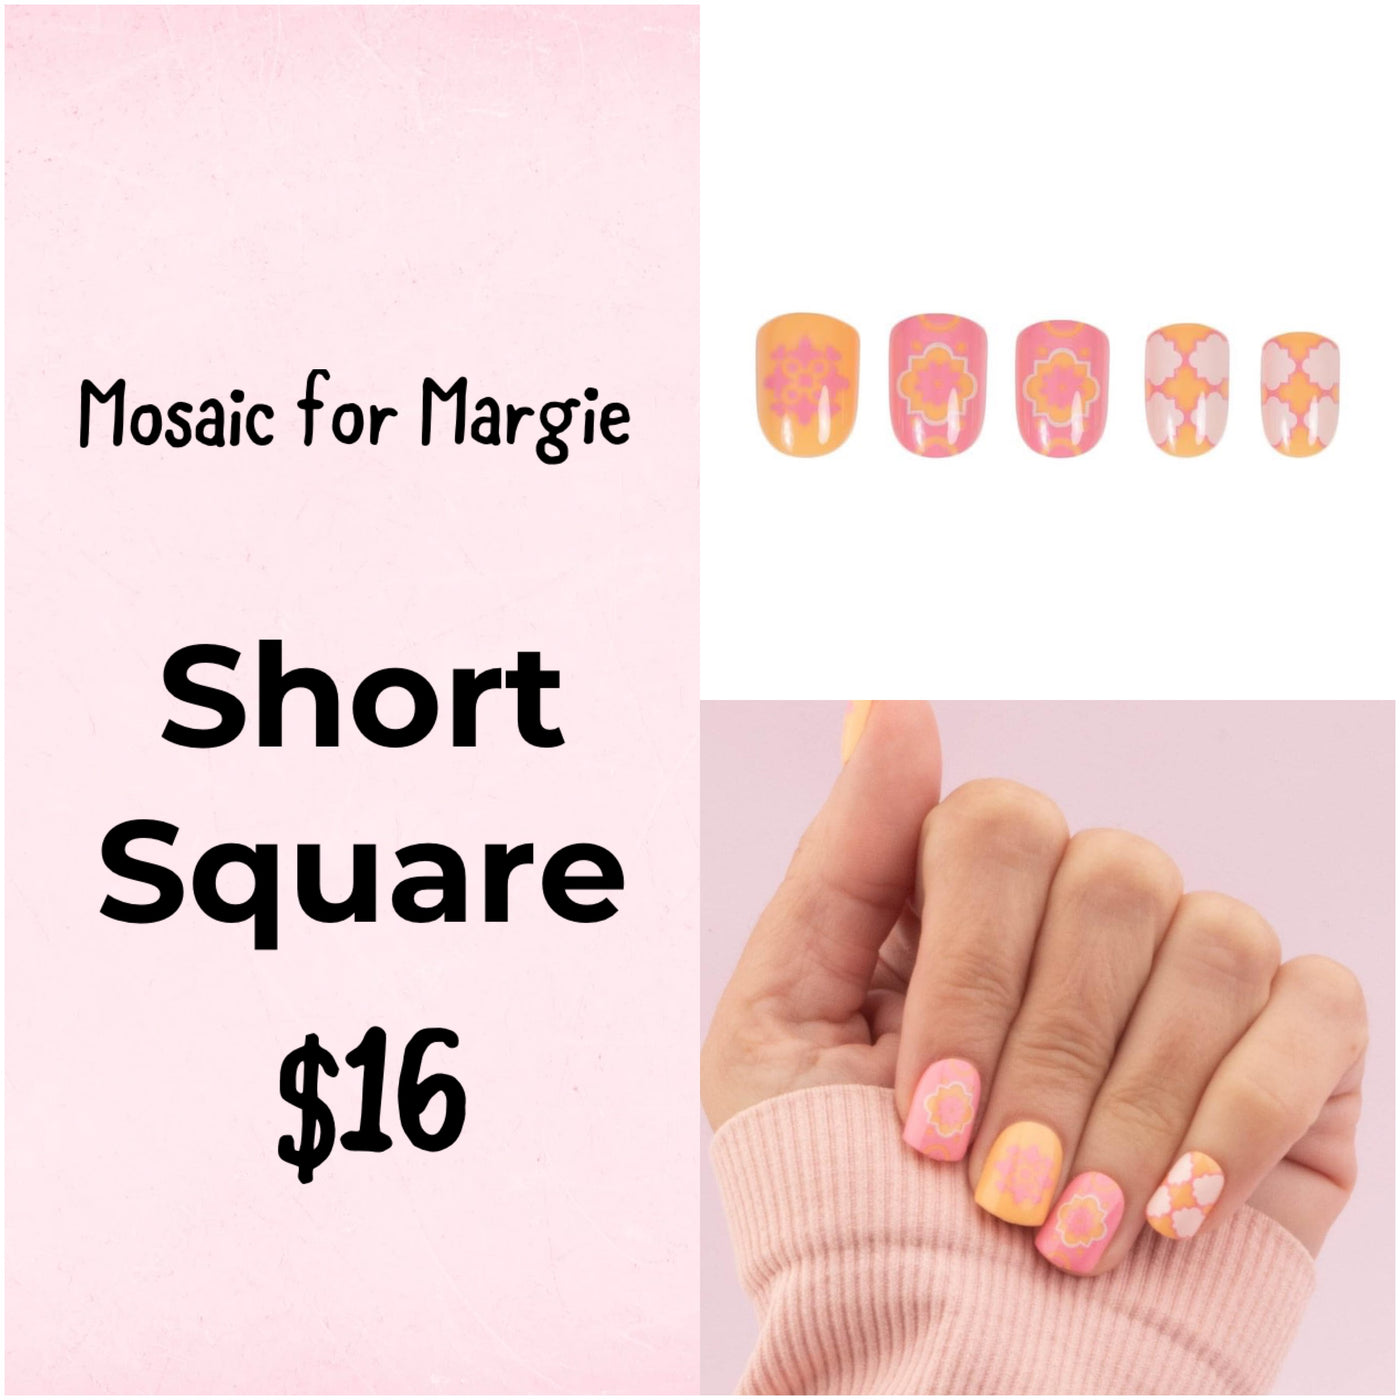 Red Aspen Nail Dashes [Mosaic for Margie]